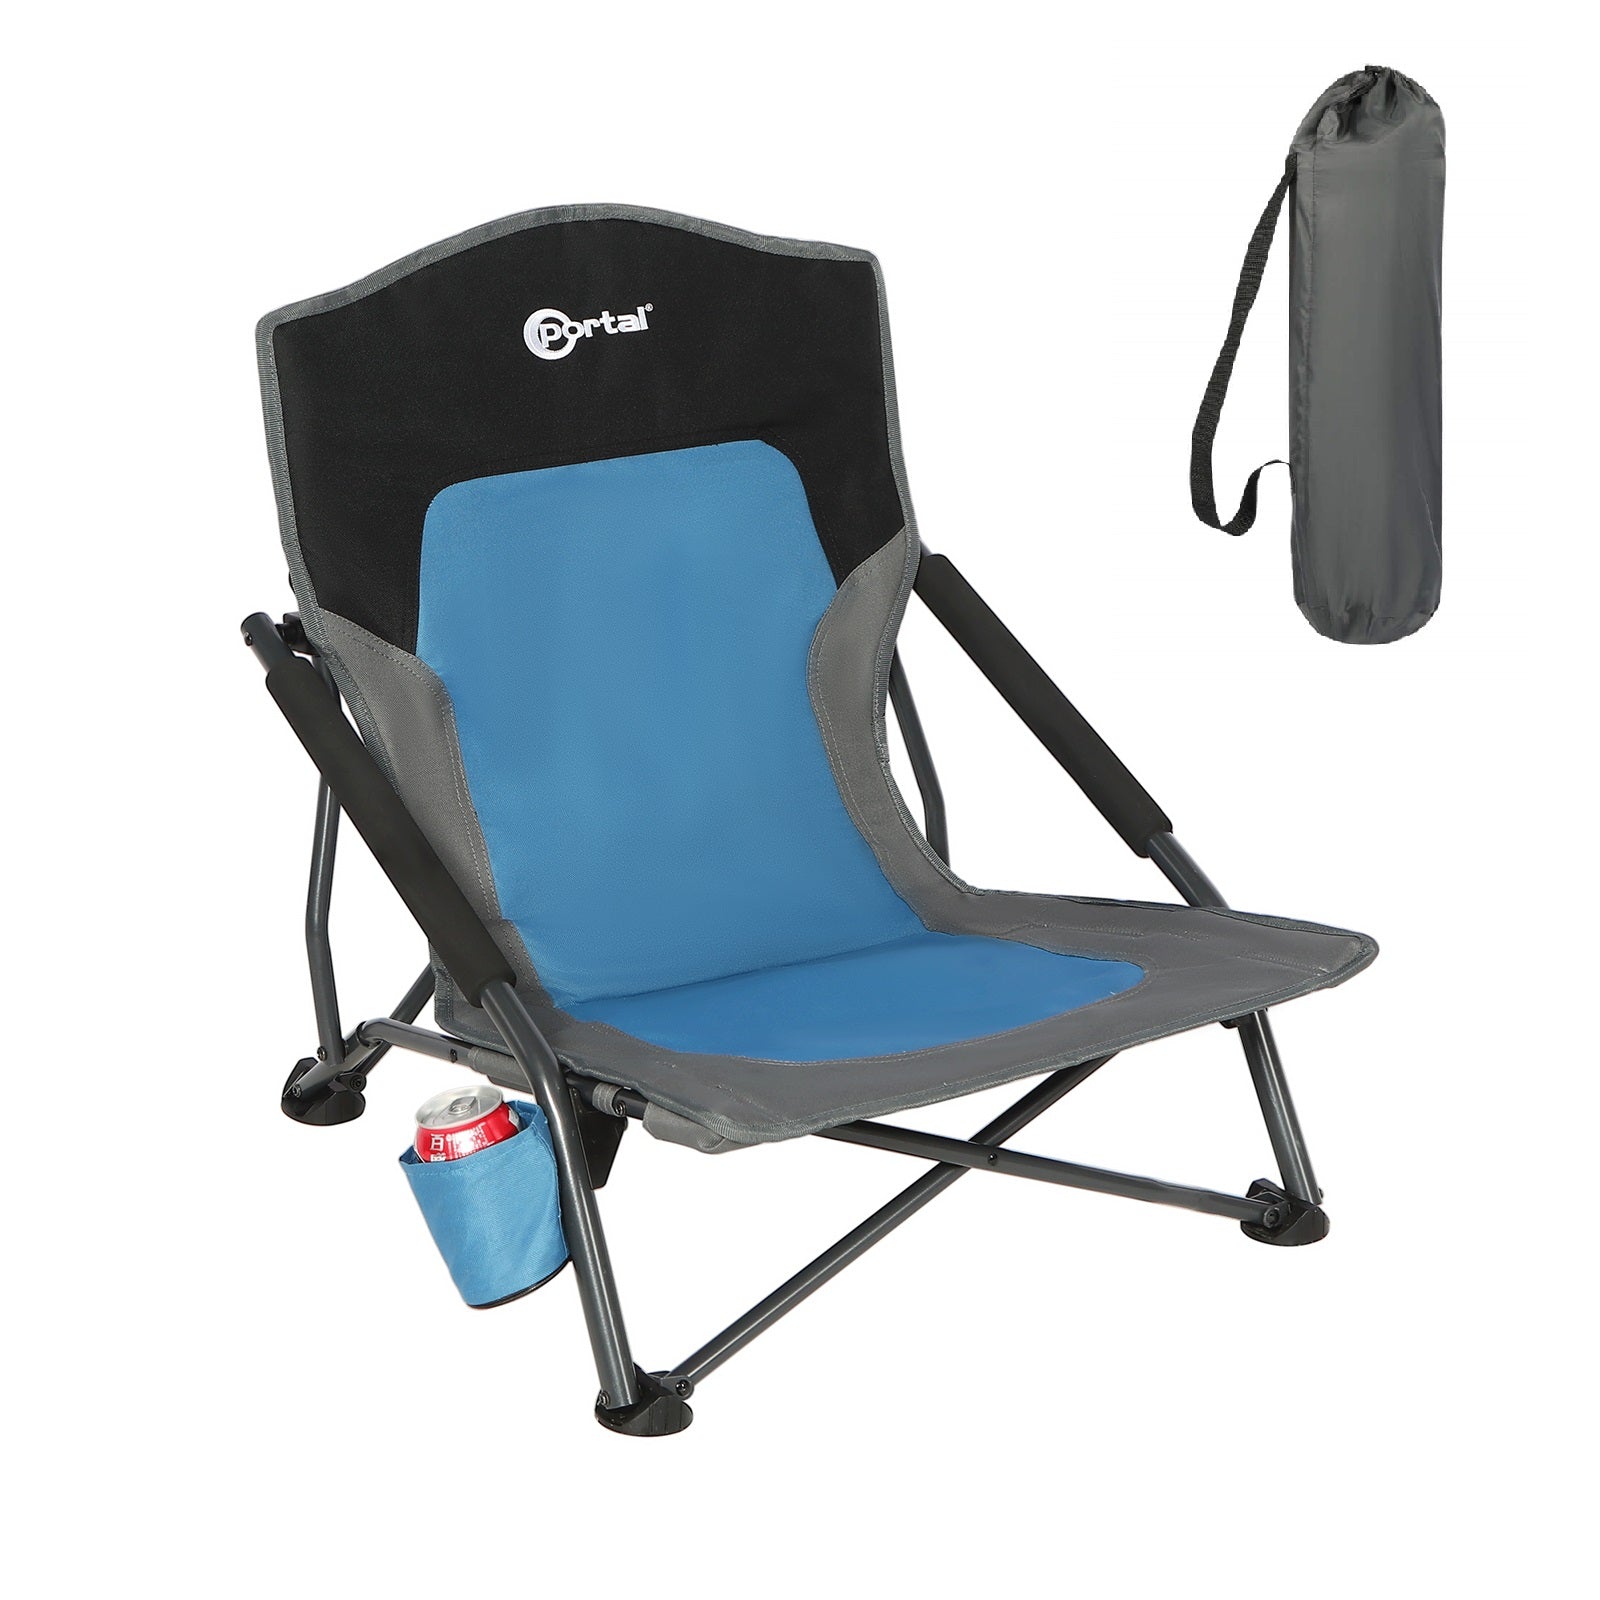 Low Small Beach Chair